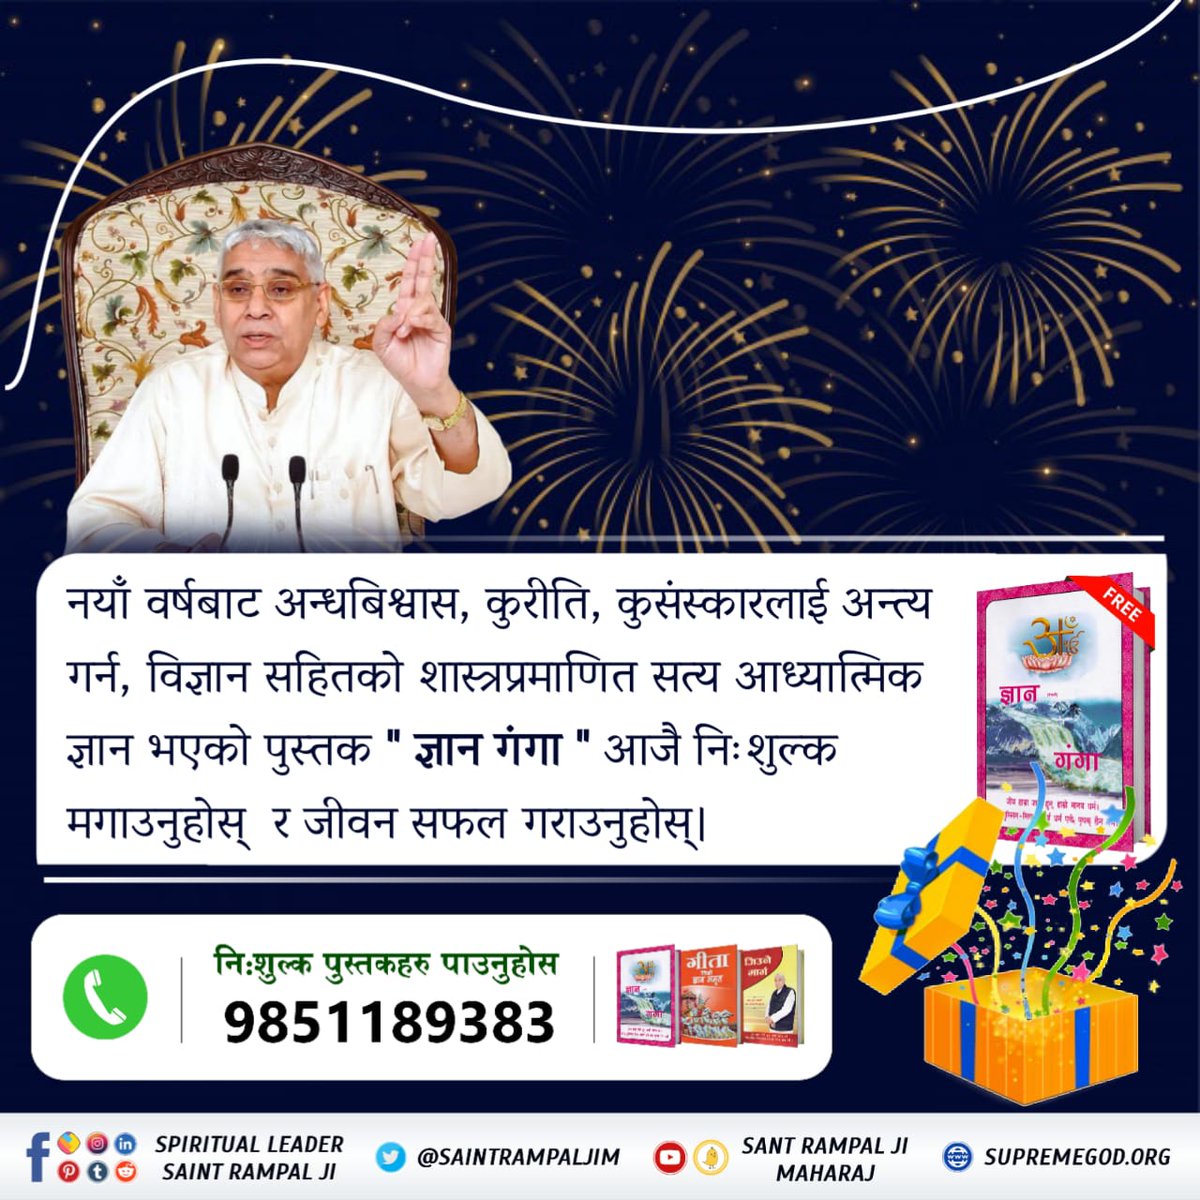 #नयाँवर्षमा_जीवनको_नयाँयात्रा
 A precious book that will bring happiness in life 'Way of  Living', get it for free at home on the occasion of this New Year.